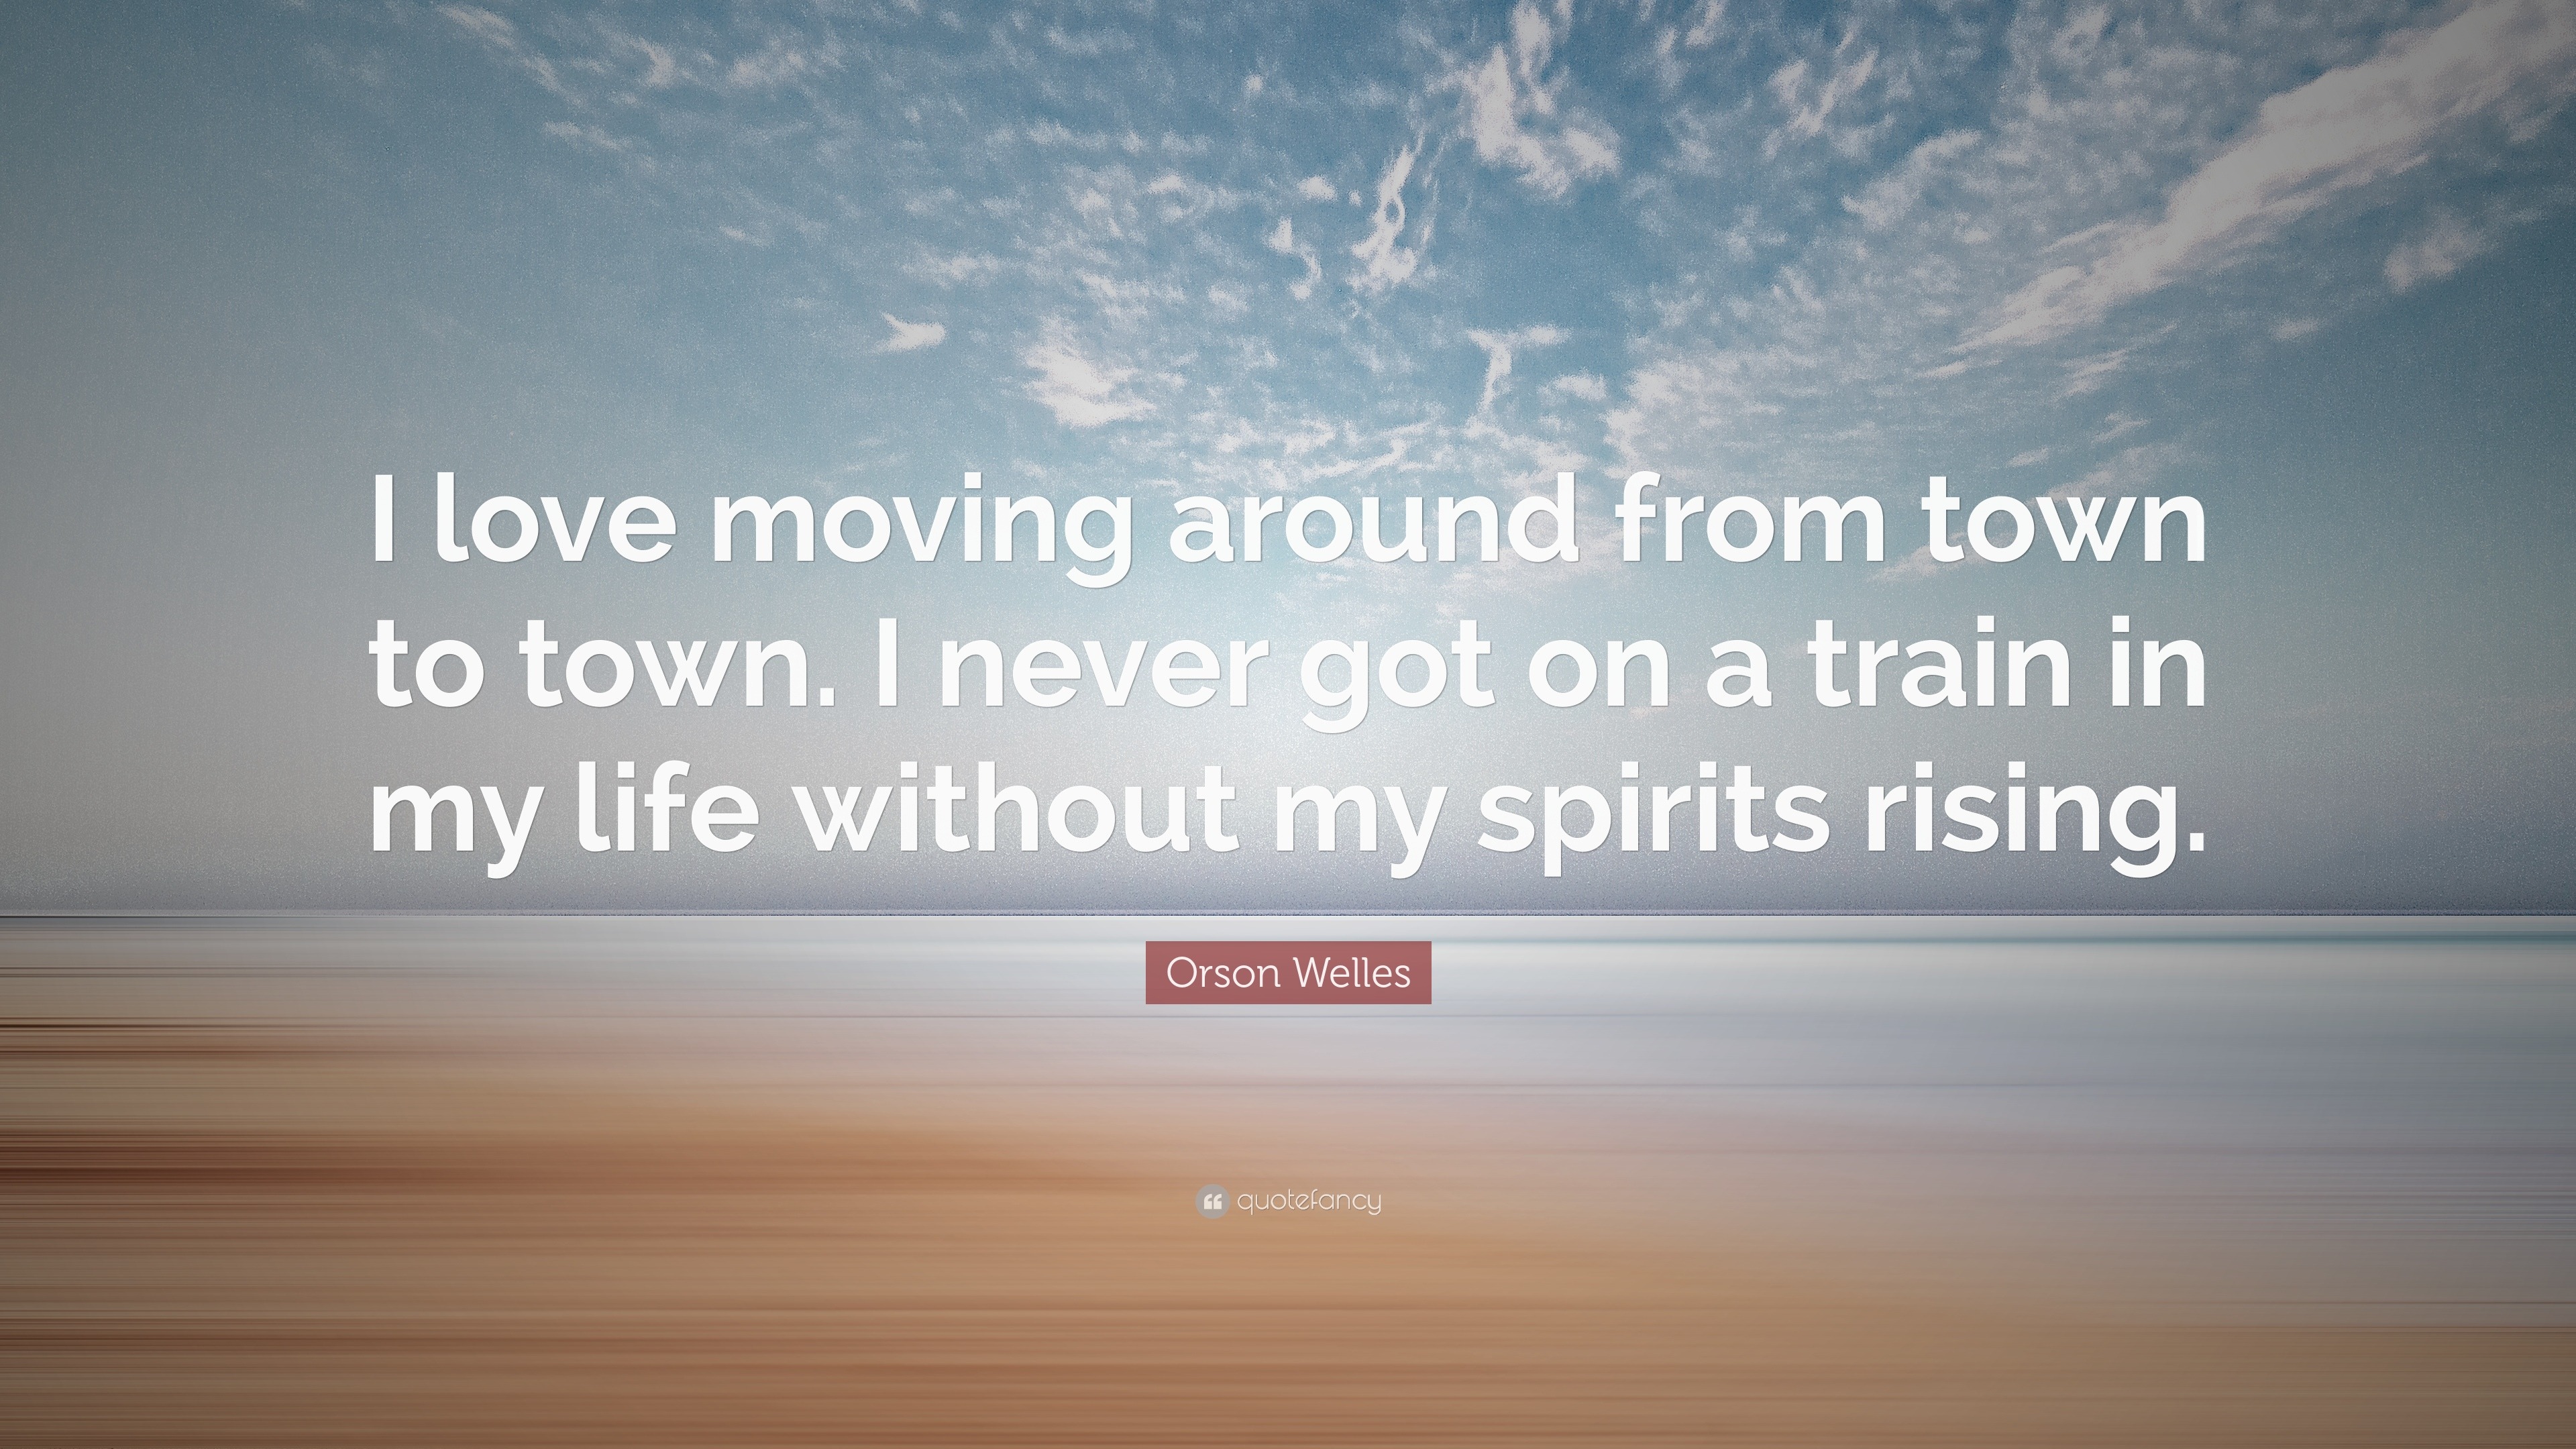 Orson Welles Quote “I love moving around from town to town I never